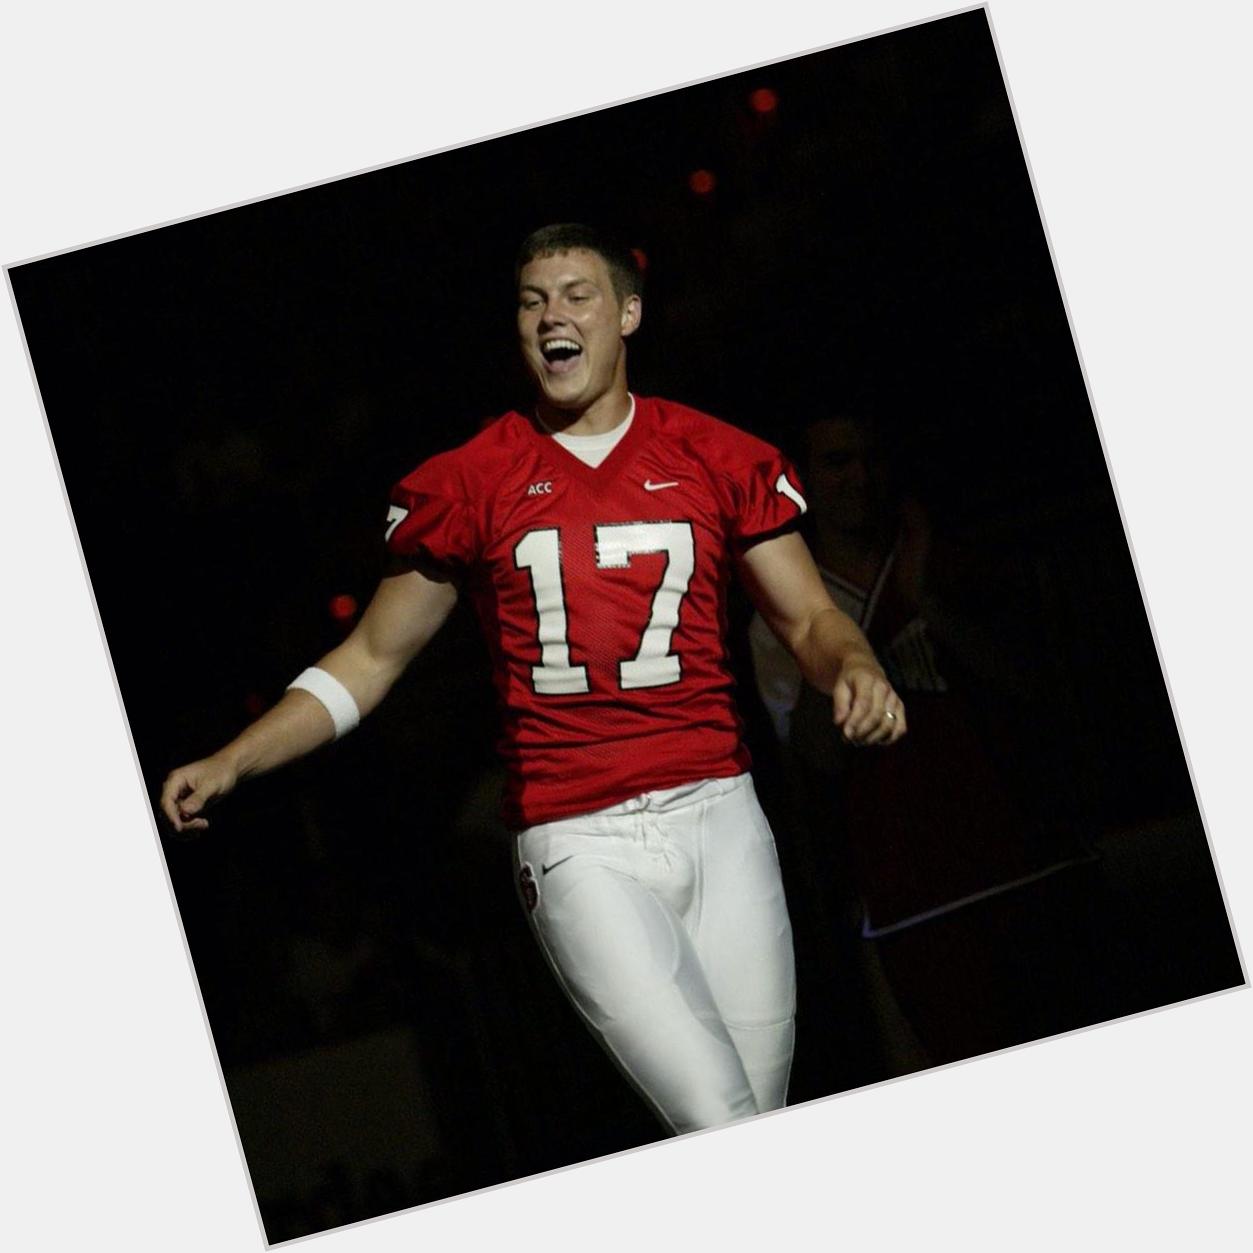   Happy Birthday to NC States Philip Rivers, still repping the Pack in the NFL since 01